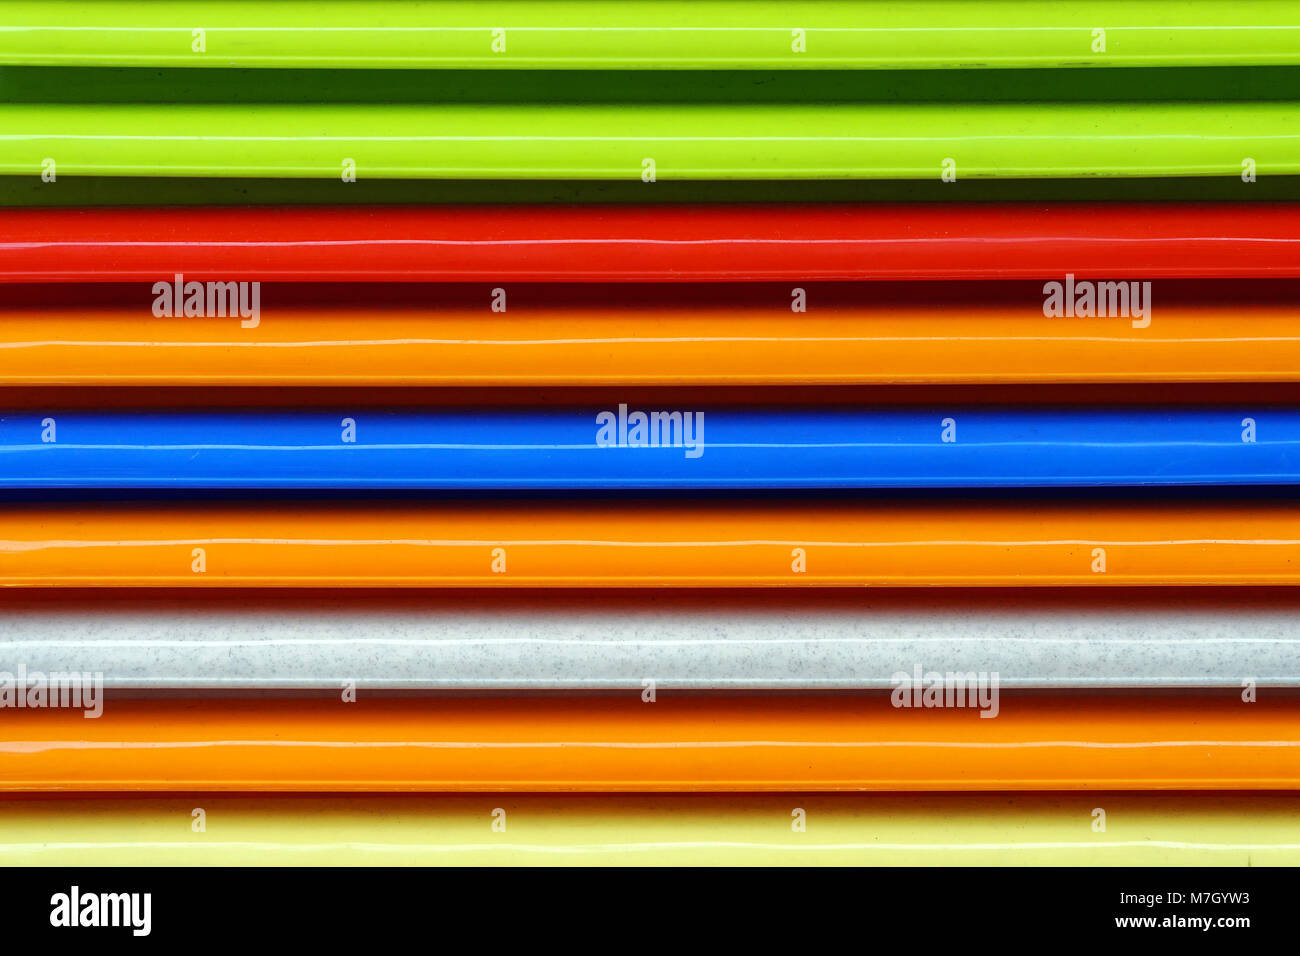 Stacked colorful plastic parts repetitive pattern Stock Photo